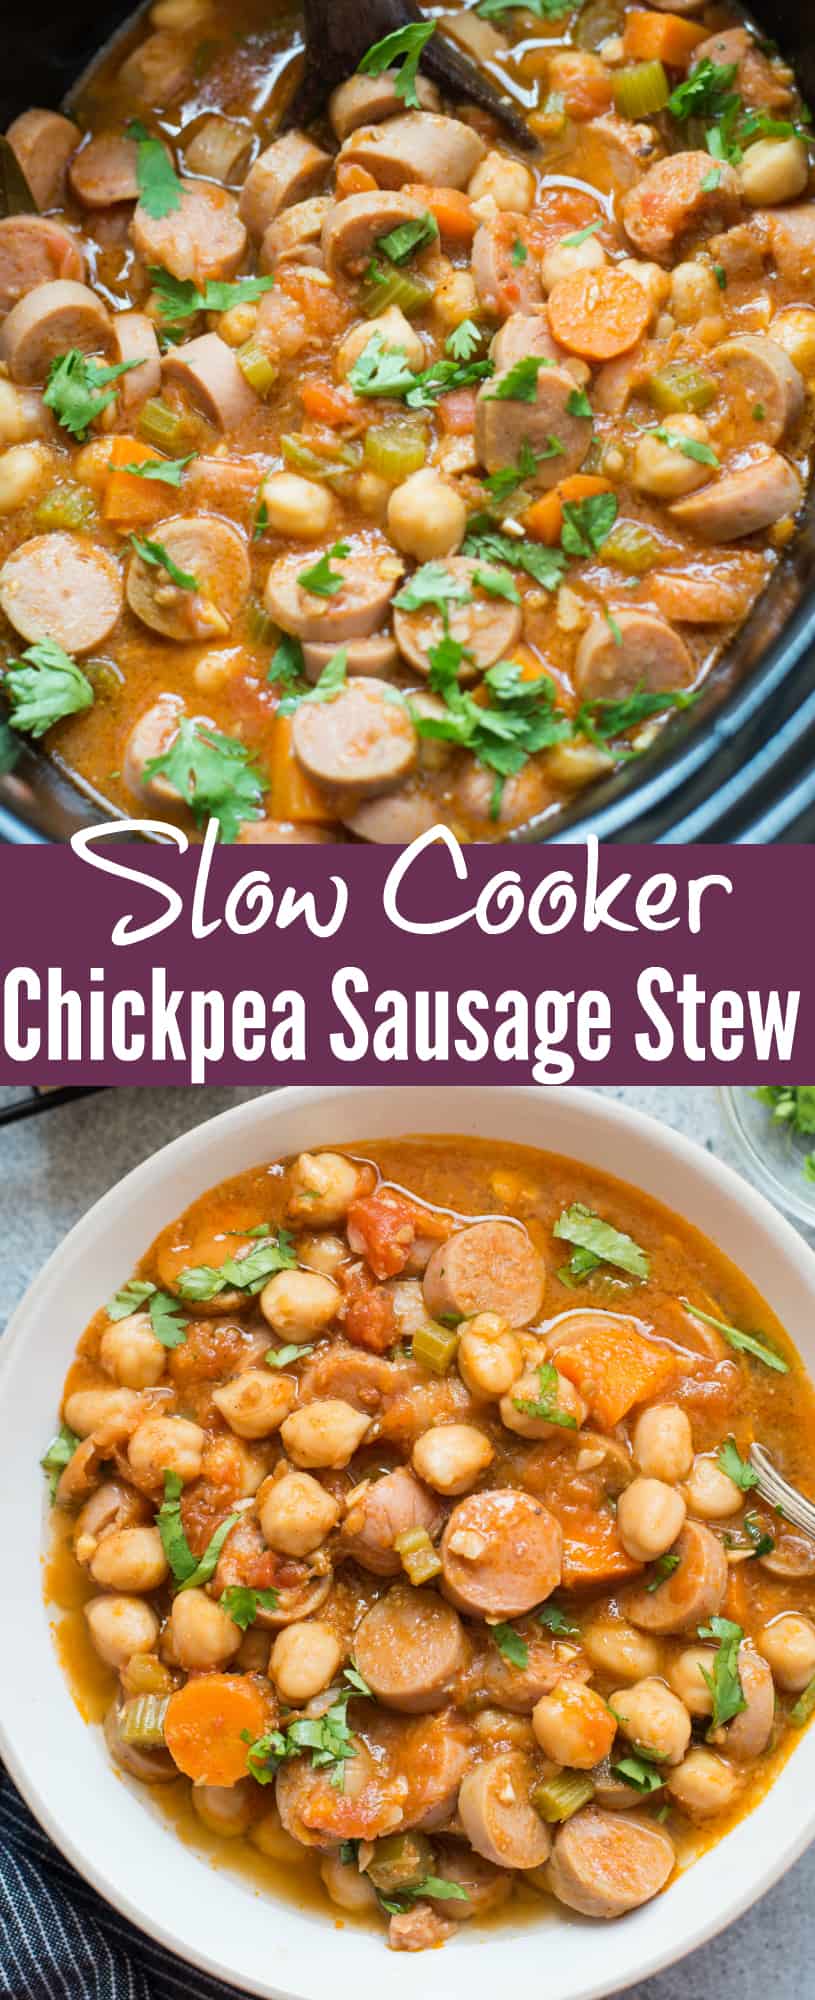 SLOW COOKER CHICKPEA SAUSAGE STEW | The flavours of kitchen